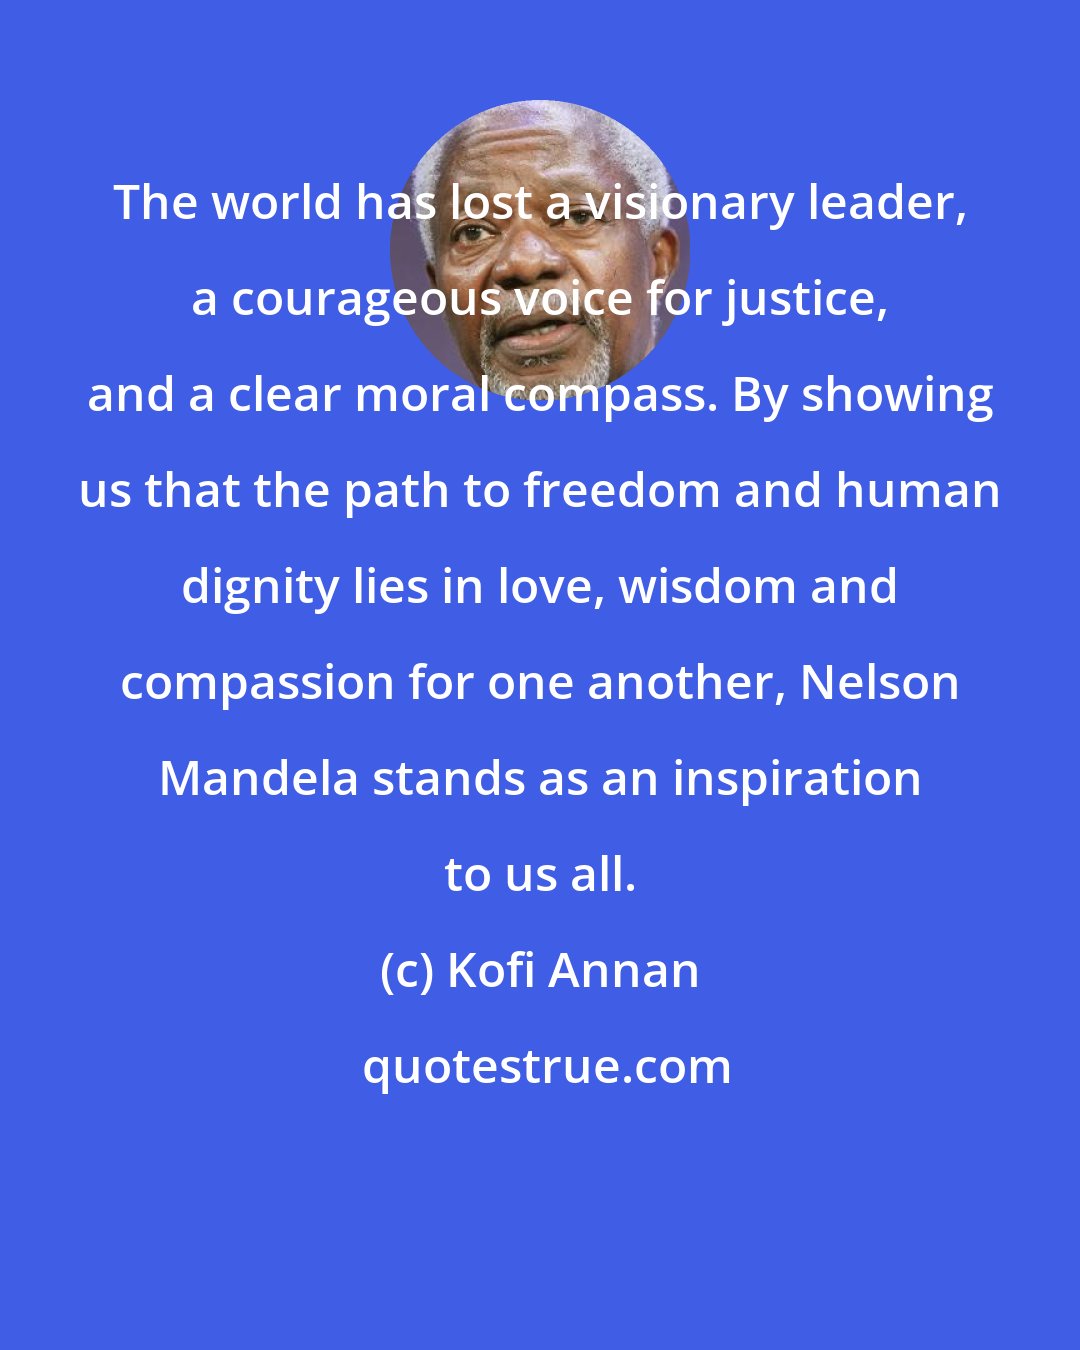 Kofi Annan: The world has lost a visionary leader, a courageous voice for justice, and a clear moral compass. By showing us that the path to freedom and human dignity lies in love, wisdom and compassion for one another, Nelson Mandela stands as an inspiration to us all.